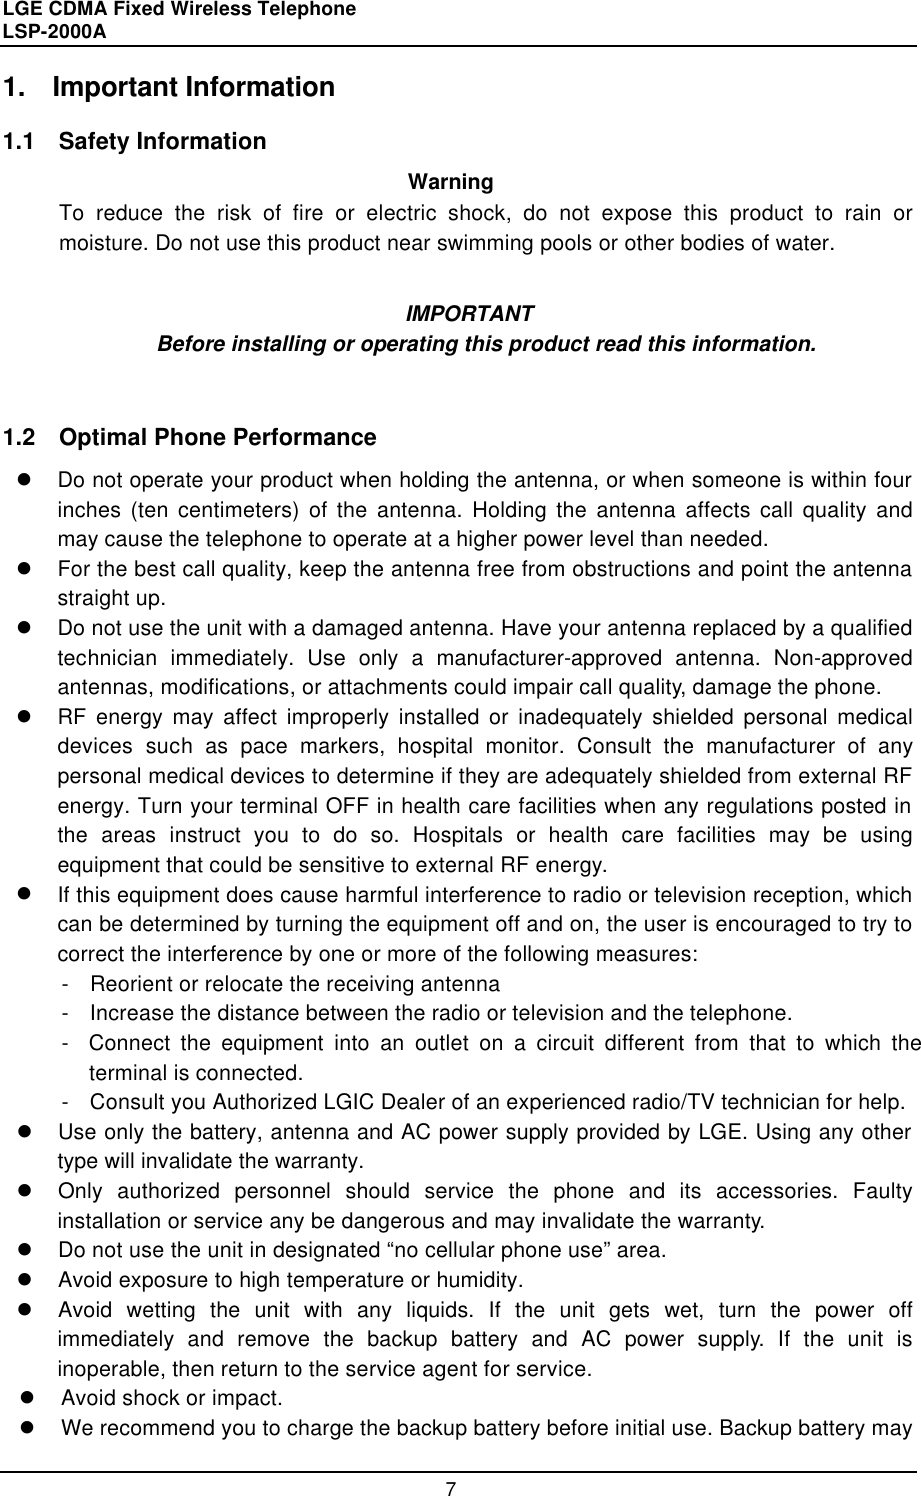 LGE CDMA Fixed Wireless Telephone                                       LSP-2000A     7 1. Important Information  1.1  Safety Information   Warning To reduce the risk of fire or electric shock, do not expose this product to rain or moisture. Do not use this product near swimming pools or other bodies of water.  IMPORTANT Before installing or operating this product read this information.   1.2  Optimal Phone Performance l Do not operate your product when holding the antenna, or when someone is within four inches (ten centimeters) of the antenna. Holding the antenna affects call quality and may cause the telephone to operate at a higher power level than needed.  l For the best call quality, keep the antenna free from obstructions and point the antenna straight up. l Do not use the unit with a damaged antenna. Have your antenna replaced by a qualified technician immediately. Use only a manufacturer-approved antenna. Non-approved antennas, modifications, or attachments could impair call quality, damage the phone. l RF energy may affect improperly installed or inadequately shielded personal medical devices such as pace markers, hospital monitor. Consult the manufacturer of any personal medical devices to determine if they are adequately shielded from external RF energy. Turn your terminal OFF in health care facilities when any regulations posted in the areas instruct you to do so. Hospitals or health care facilities may be using equipment that could be sensitive to external RF energy. l If this equipment does cause harmful interference to radio or television reception, which can be determined by turning the equipment off and on, the user is encouraged to try to correct the interference by one or more of the following measures: -  Reorient or relocate the receiving antenna -  Increase the distance between the radio or television and the telephone. -  Connect the equipment into an outlet on a circuit different from that to which the                     terminal is connected. -  Consult you Authorized LGIC Dealer of an experienced radio/TV technician for help. l Use only the battery, antenna and AC power supply provided by LGE. Using any other type will invalidate the warranty. l Only authorized personnel should service the phone and its accessories. Faulty installation or service any be dangerous and may invalidate the warranty. l Do not use the unit in designated “no cellular phone use” area. l Avoid exposure to high temperature or humidity. l Avoid wetting the unit with any liquids. If the unit gets wet, turn the power off immediately and remove the backup battery and AC power supply. If the unit is inoperable, then return to the service agent for service. l Avoid shock or impact. l We recommend you to charge the backup battery before initial use. Backup battery may  